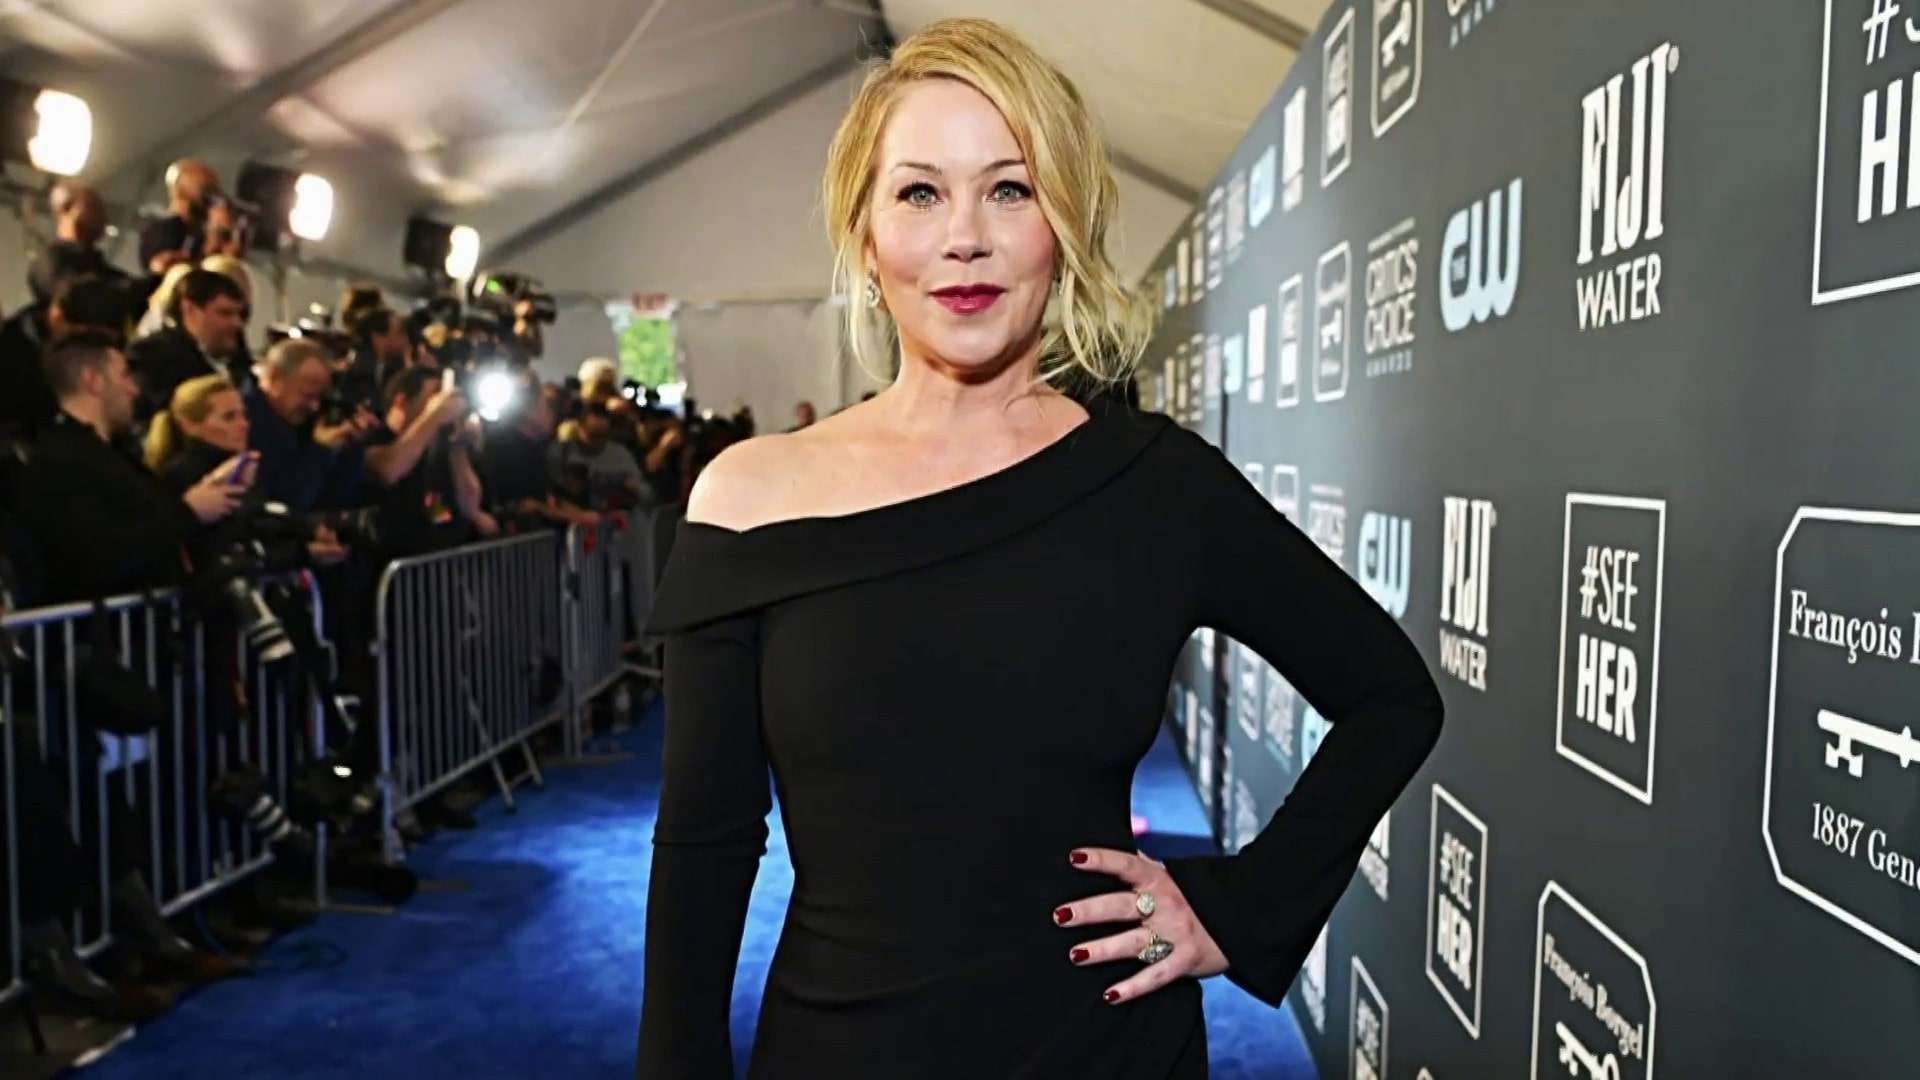 Christina Applegate expresses her frustration about neglecting symptoms that led to the diagnosis of multiple sclerosis.